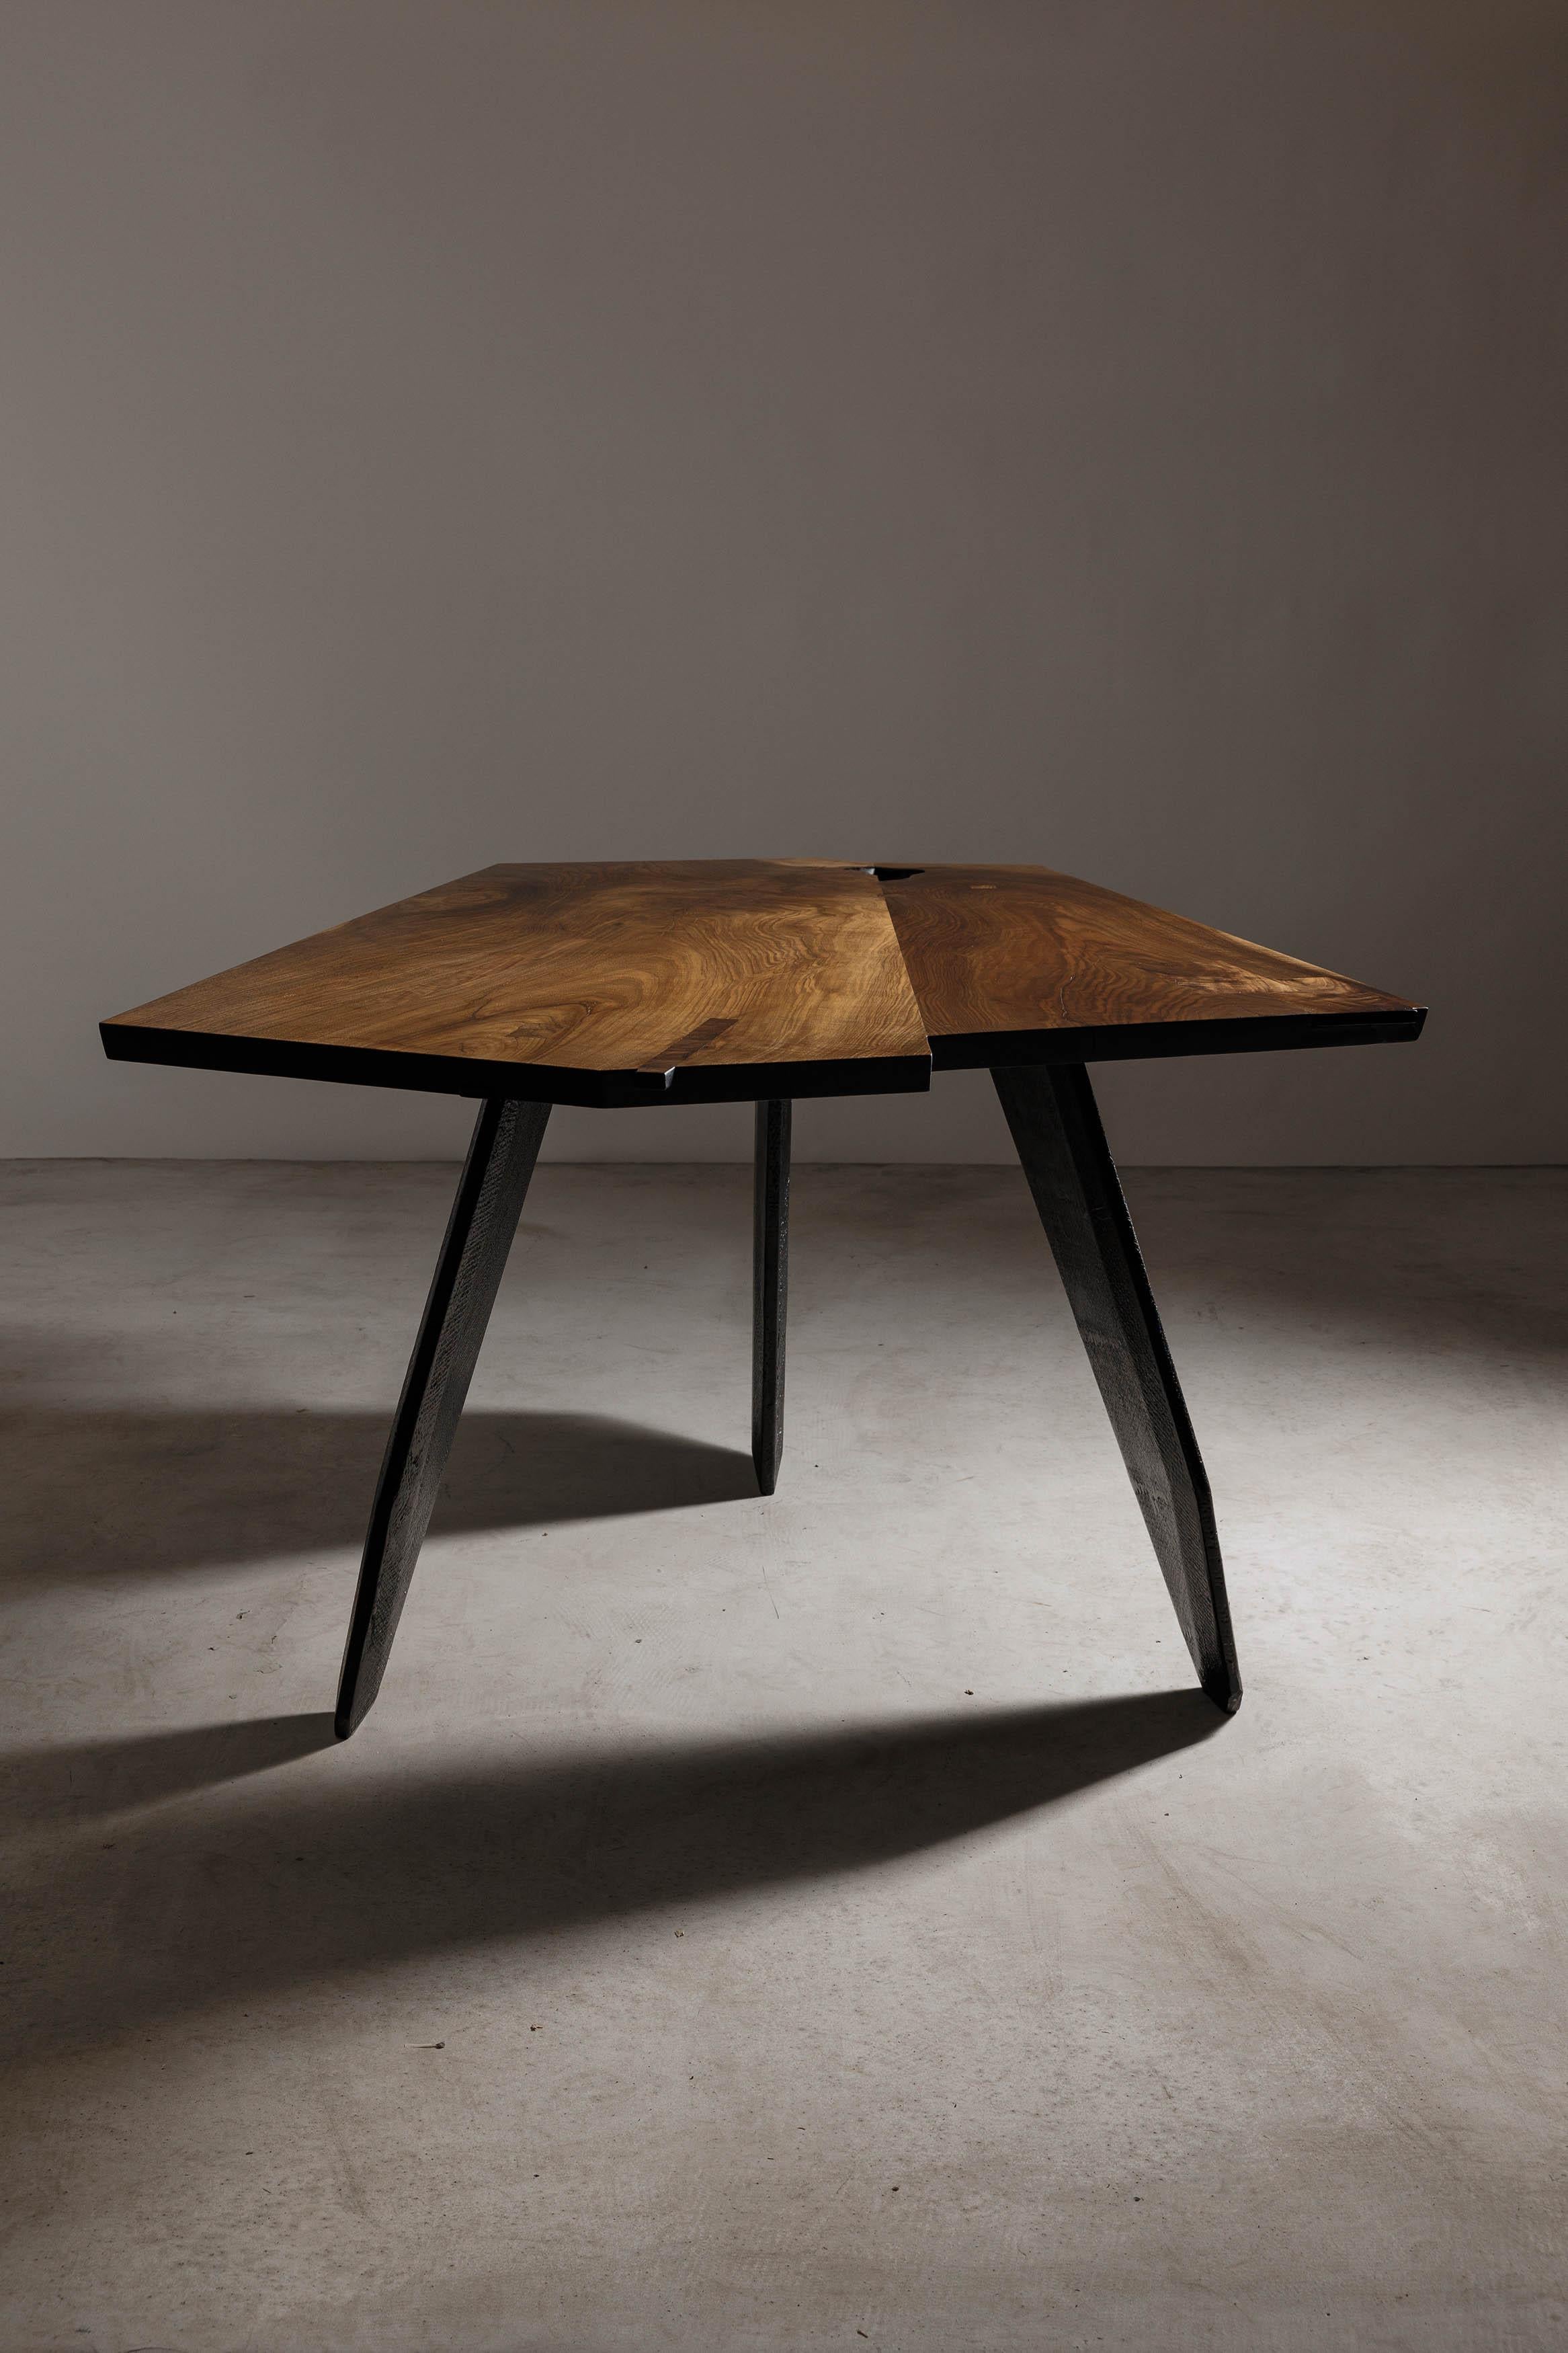 Eero Moss Small Walnut Dining Table, EM206 In New Condition For Sale In Ghimbav, RO